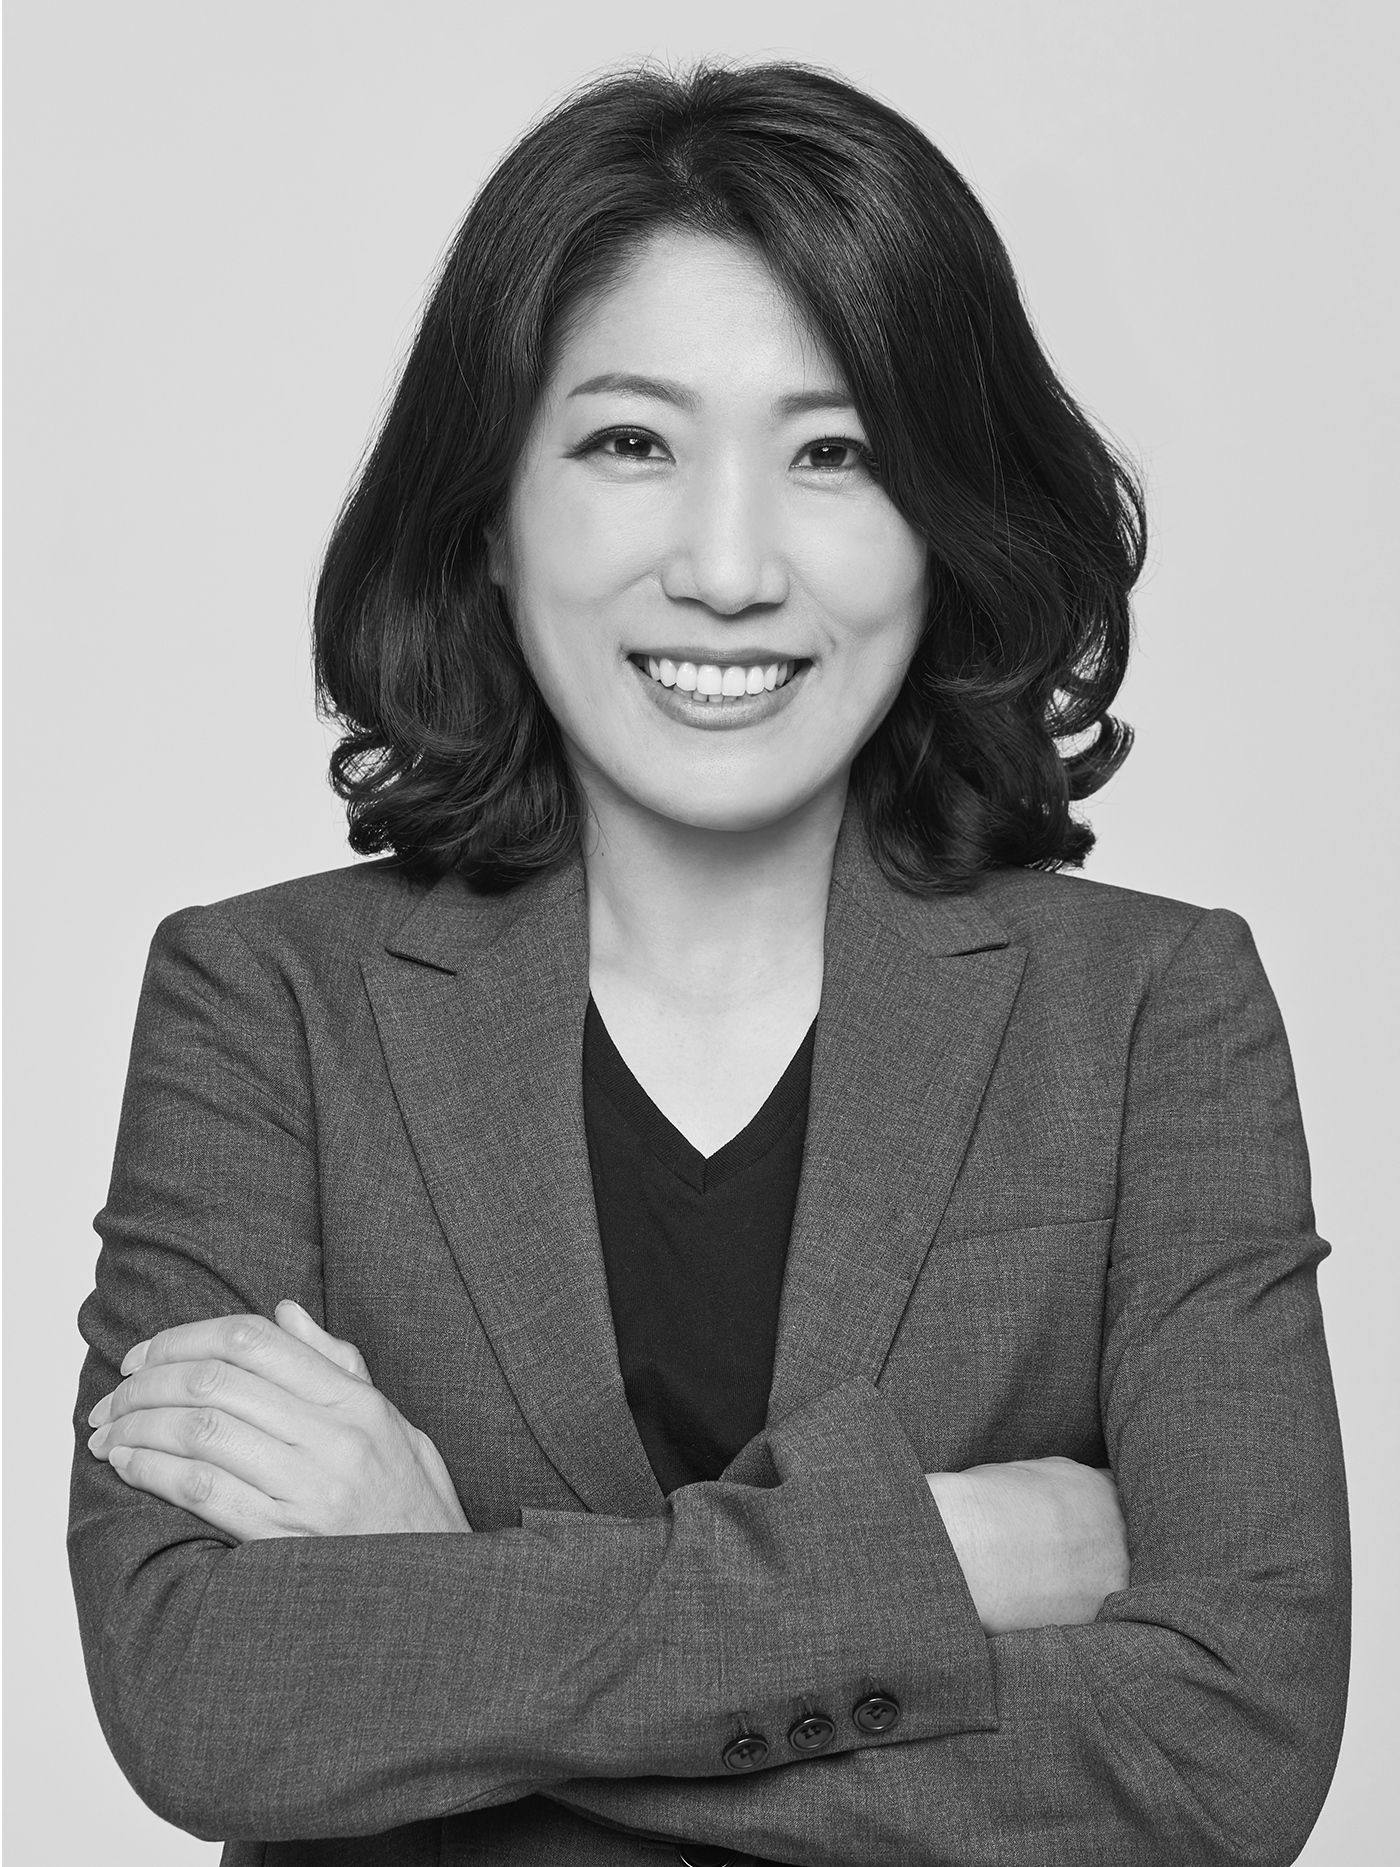 Sun Lee - Head of Music Parternerships & Subscription,Google-Korea & Greater China,she was recognized as one of Billboard's 2019 International Power Players